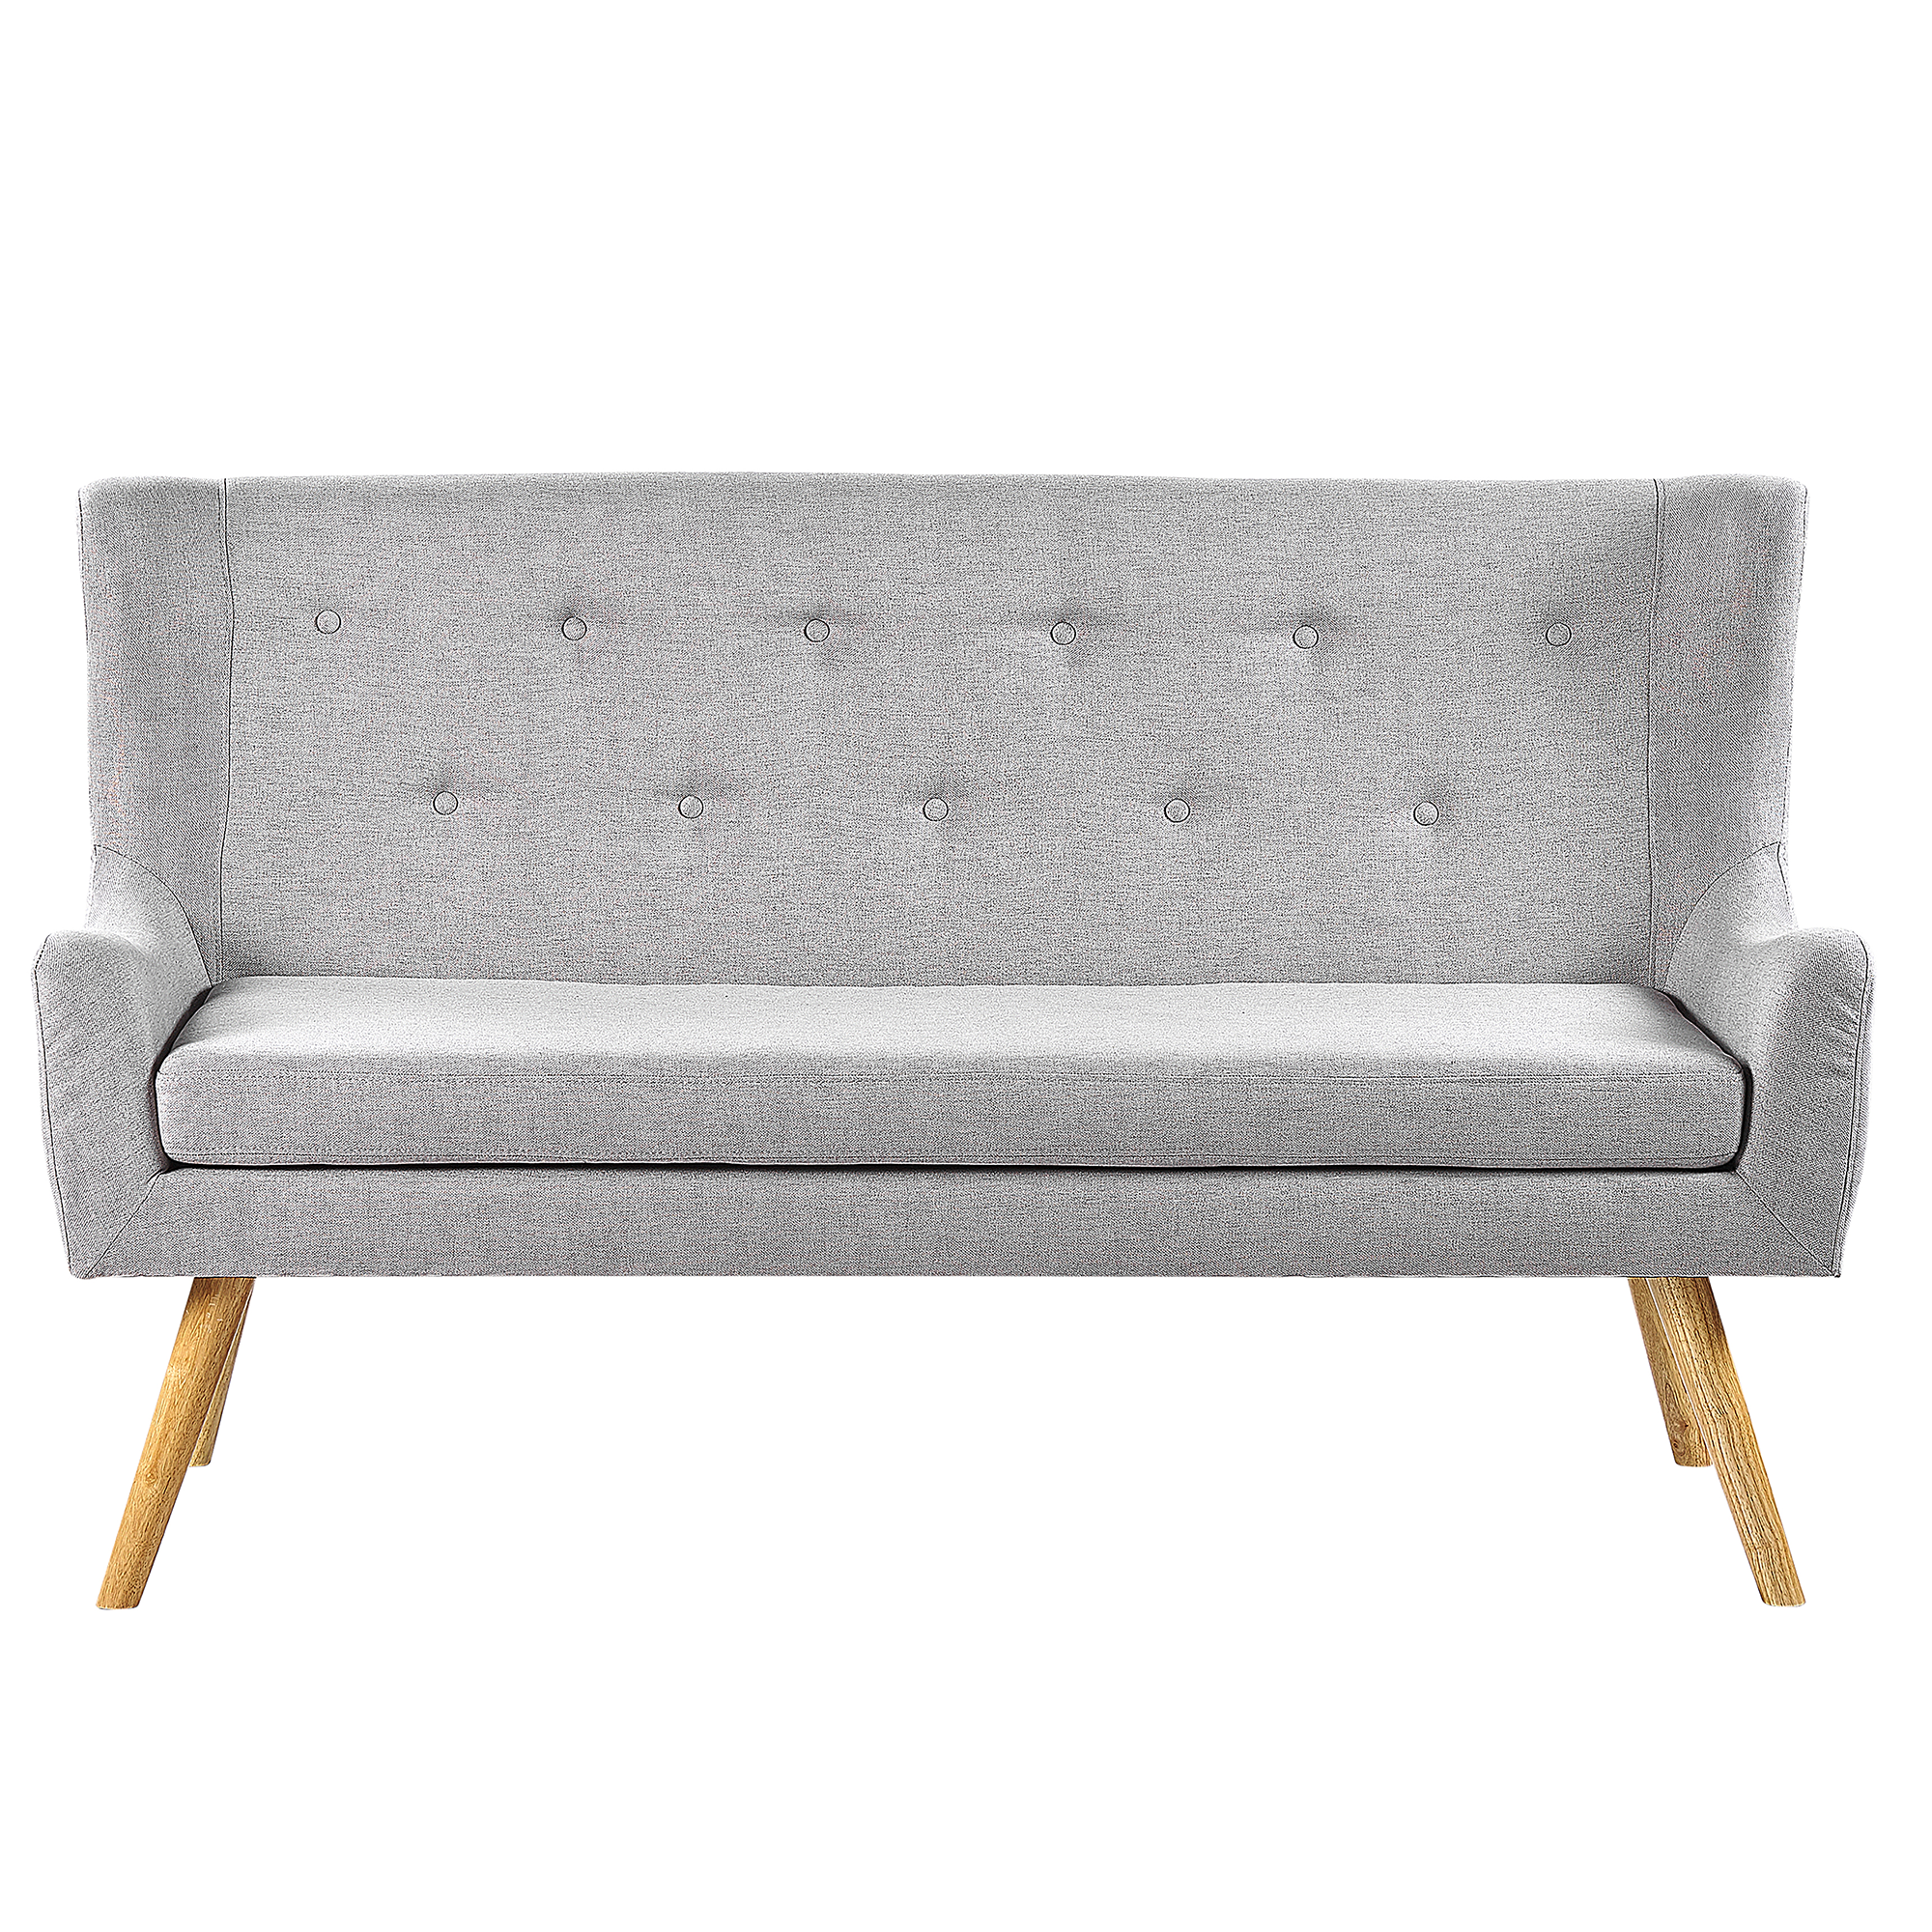 Beliani Kitchen Sofa Grey Polyester Fabric Upholstery 2-Seater Wingback Tufted Light Wood Legs